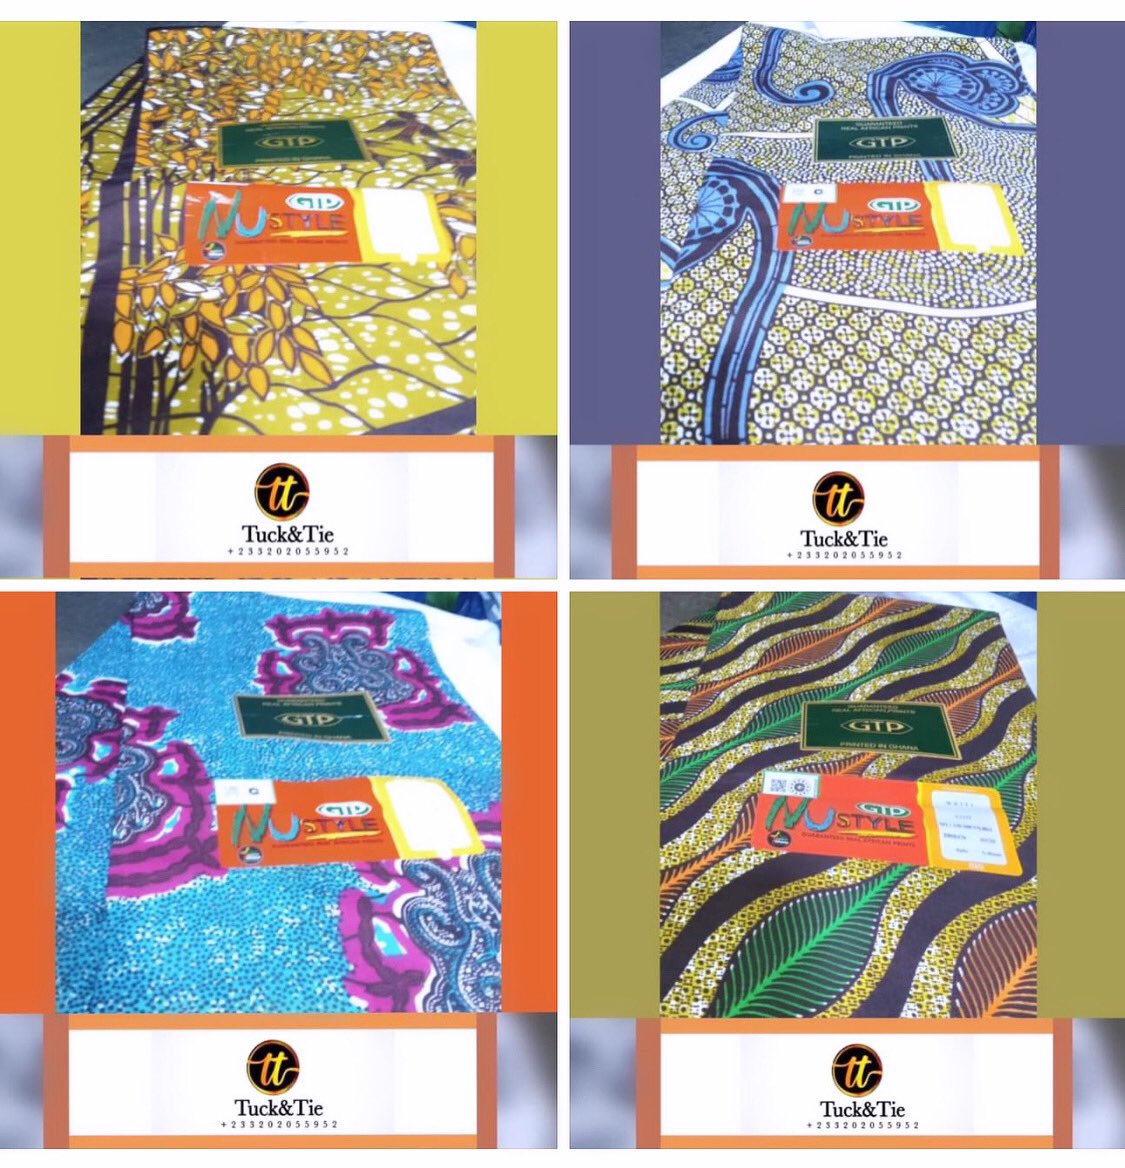 Latest arrival from Tuck&Tie. Contact us now for your quality, unique and standard fabrics Call: 020 205 5952 to place your order #tuckntie #duku #africanfabric #Ghanaianfabric #Madeinghana